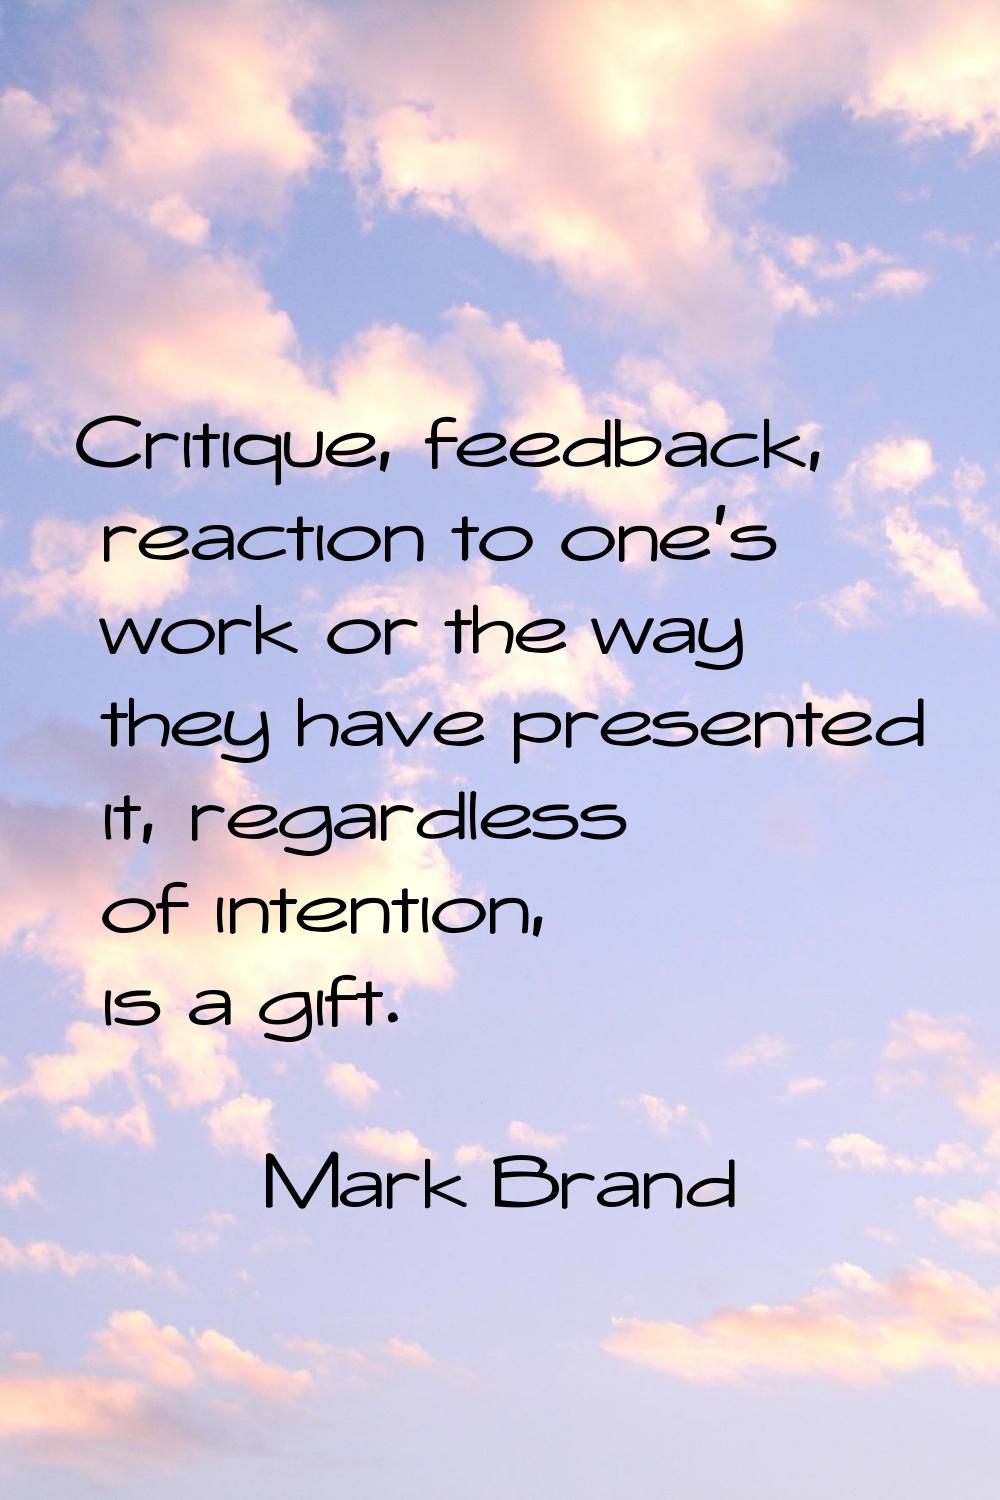 Critique, feedback, reaction to one's work or the way they have presented it, regardless of intenti